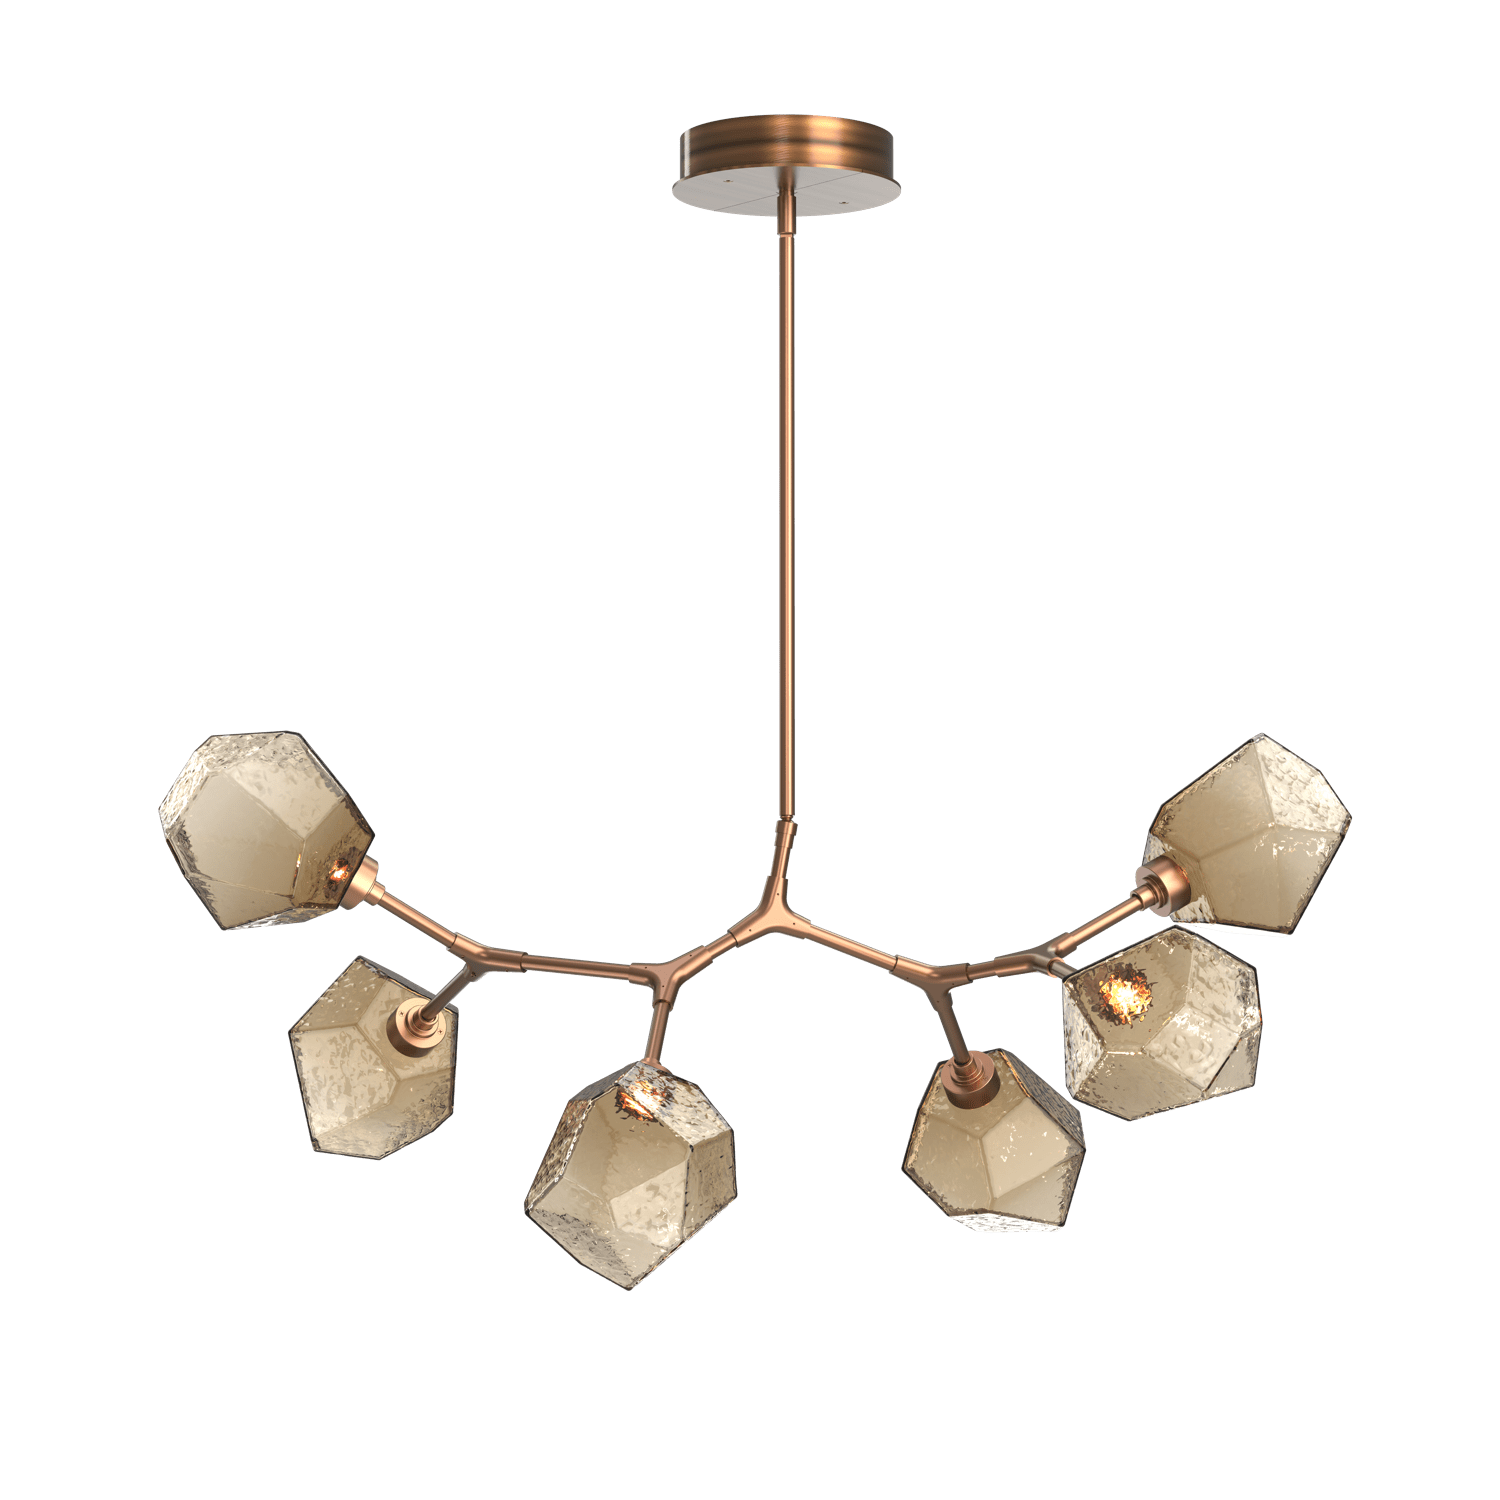 PLB0039-BA-RB-B-Hammerton-Studio-Gem-6-light-modern-branch-chandelier-with-oil-rubbed-bronze-finish-and-bronze-blown-glass-shades-and-LED-lamping